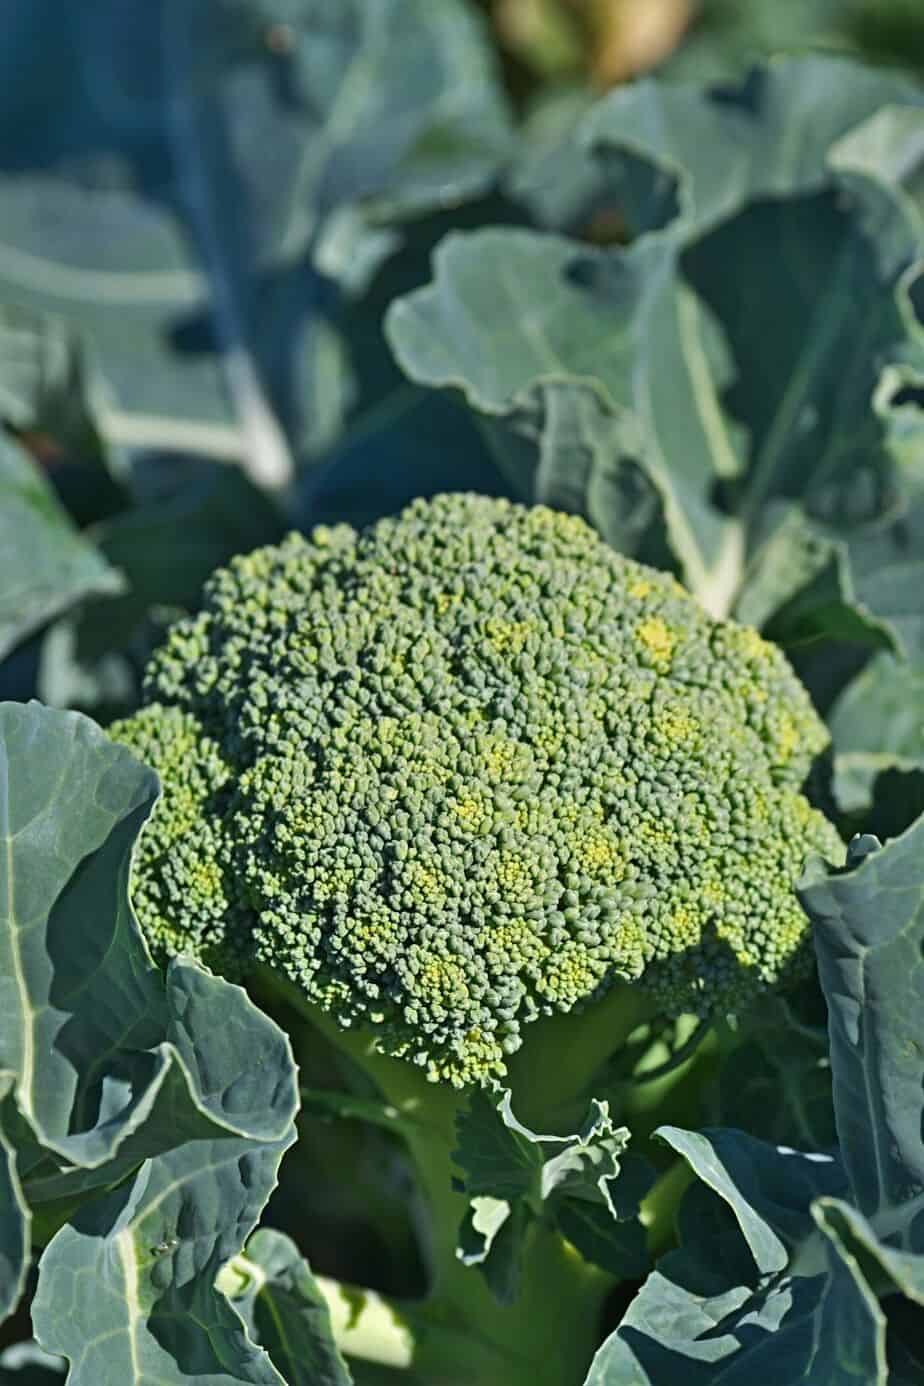 Broccoli, unlike the other vegetables you can grow in raised beds, can tolerate cold weather